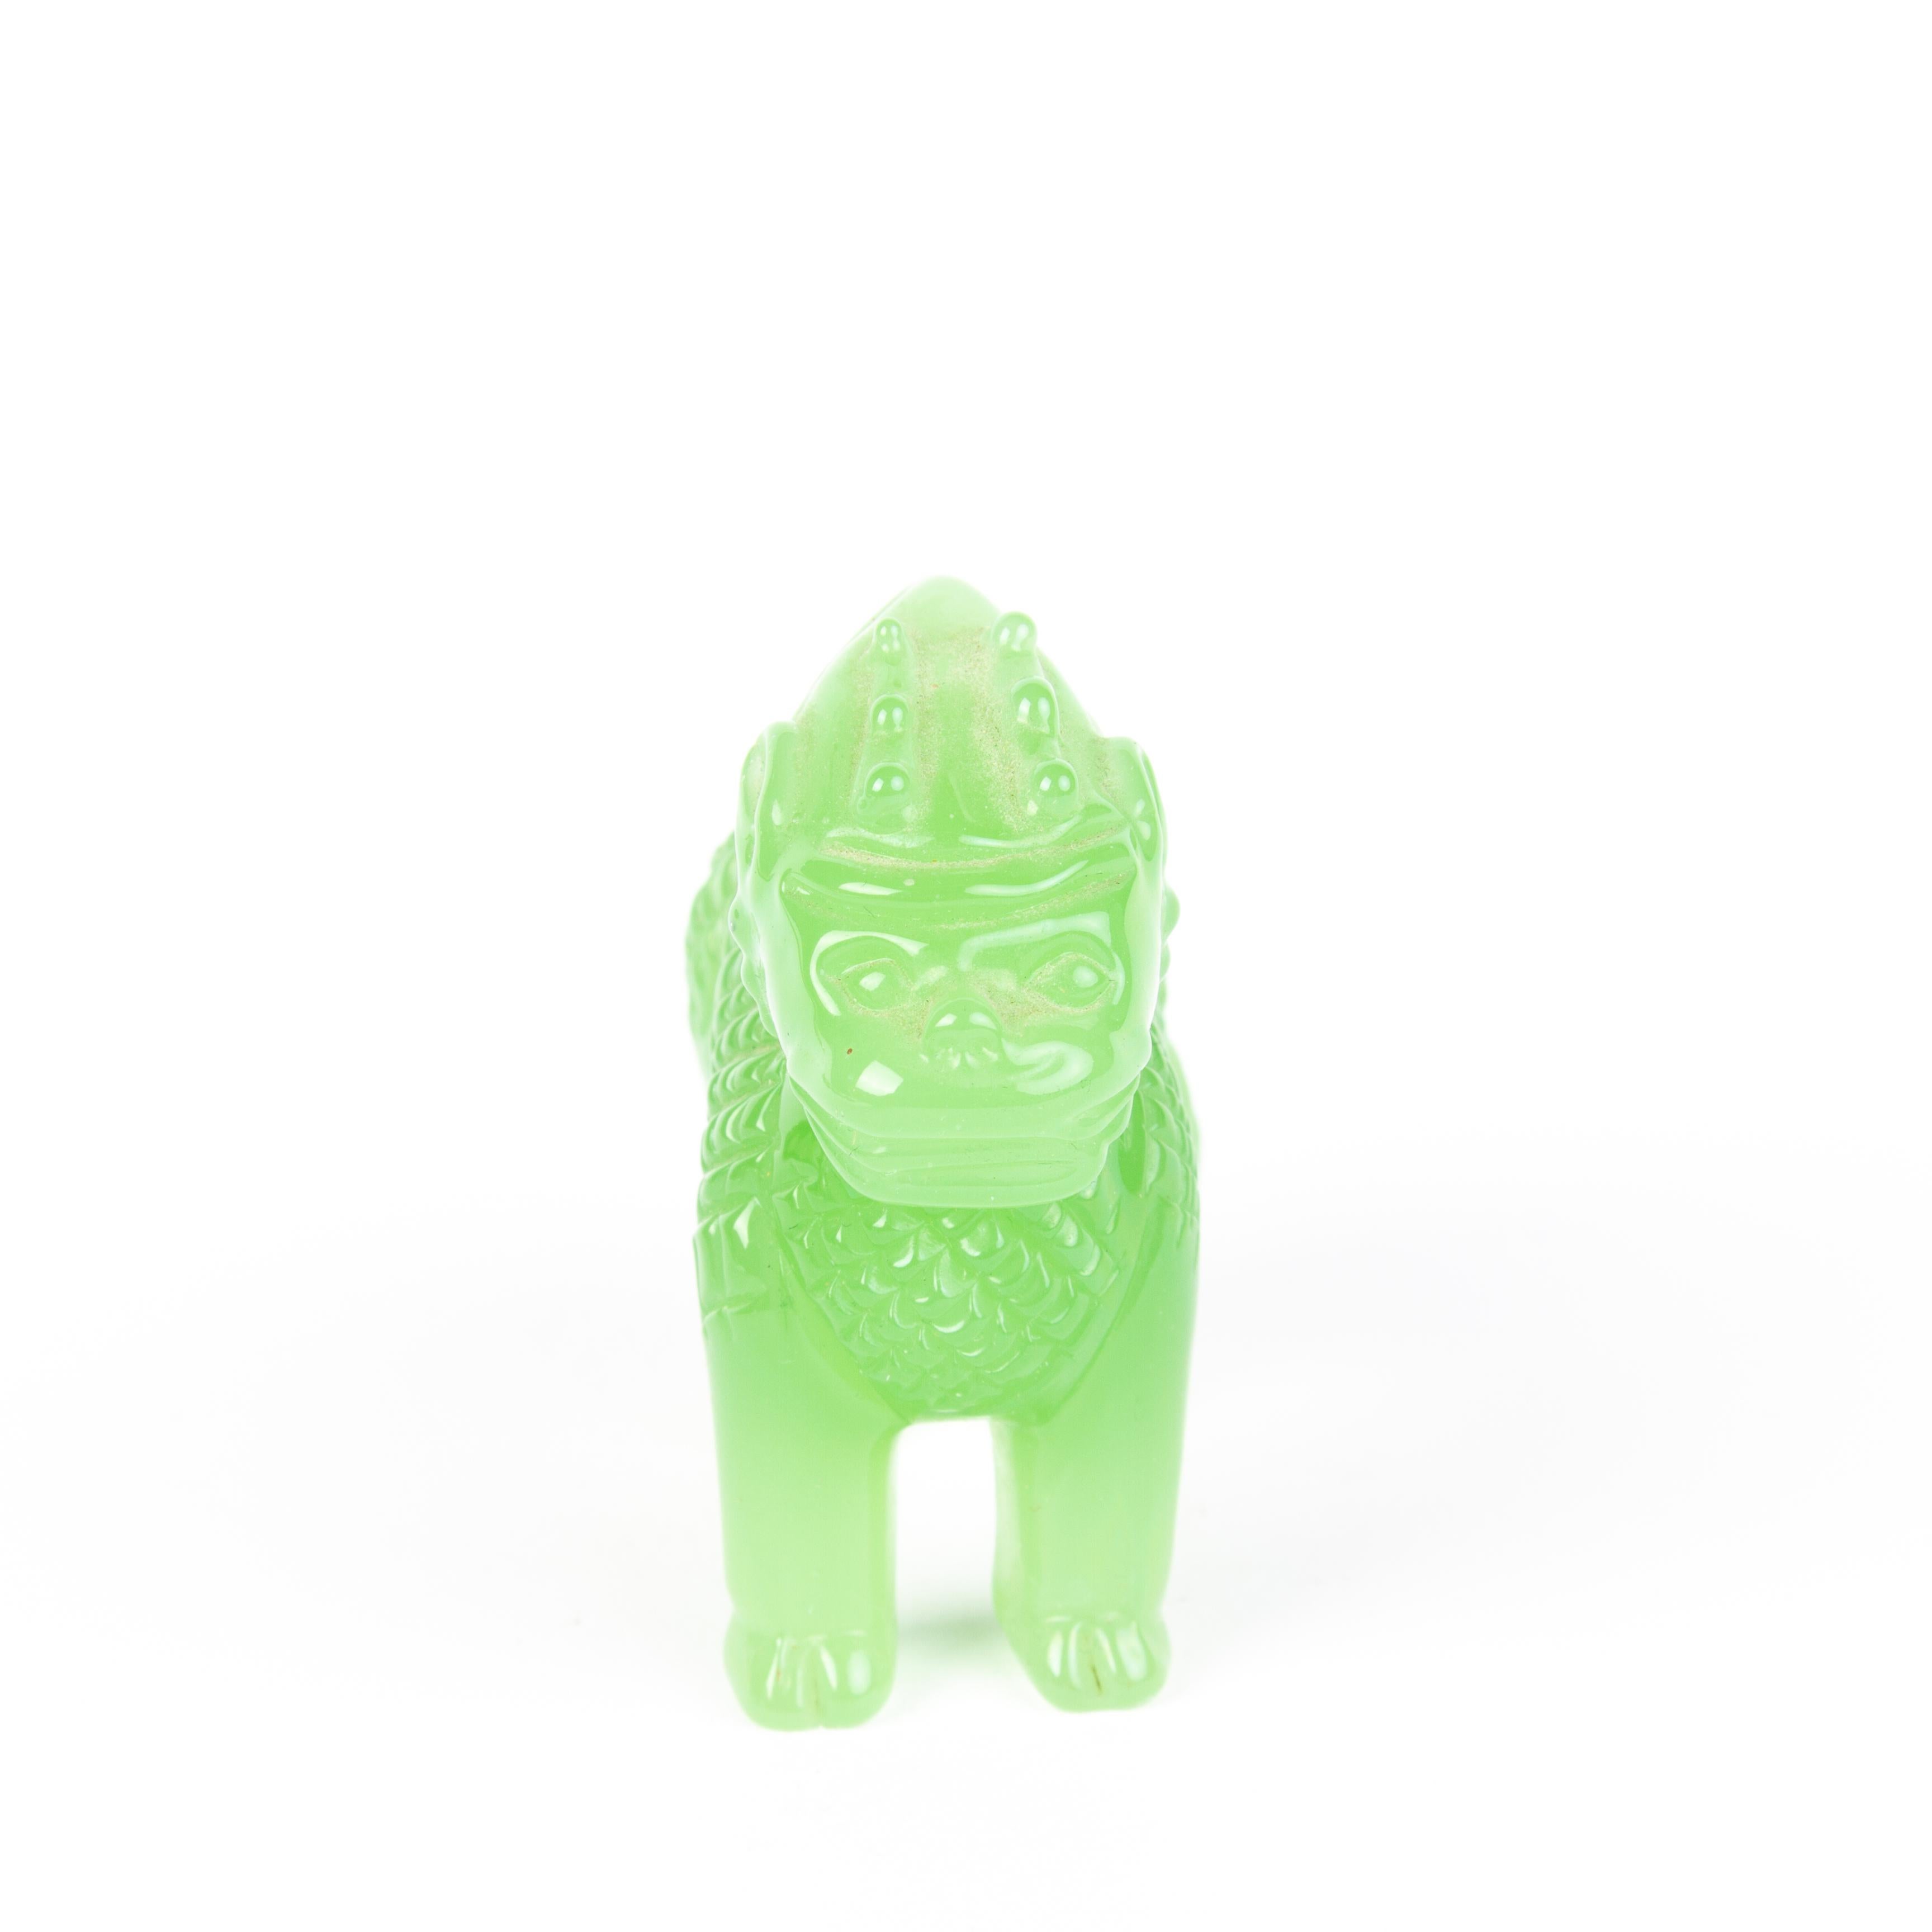 Chinese Carved jadeite Sculpture of a foo dog 19th Century Qing
Very good condition.
From a private collection.
Free international shipping.